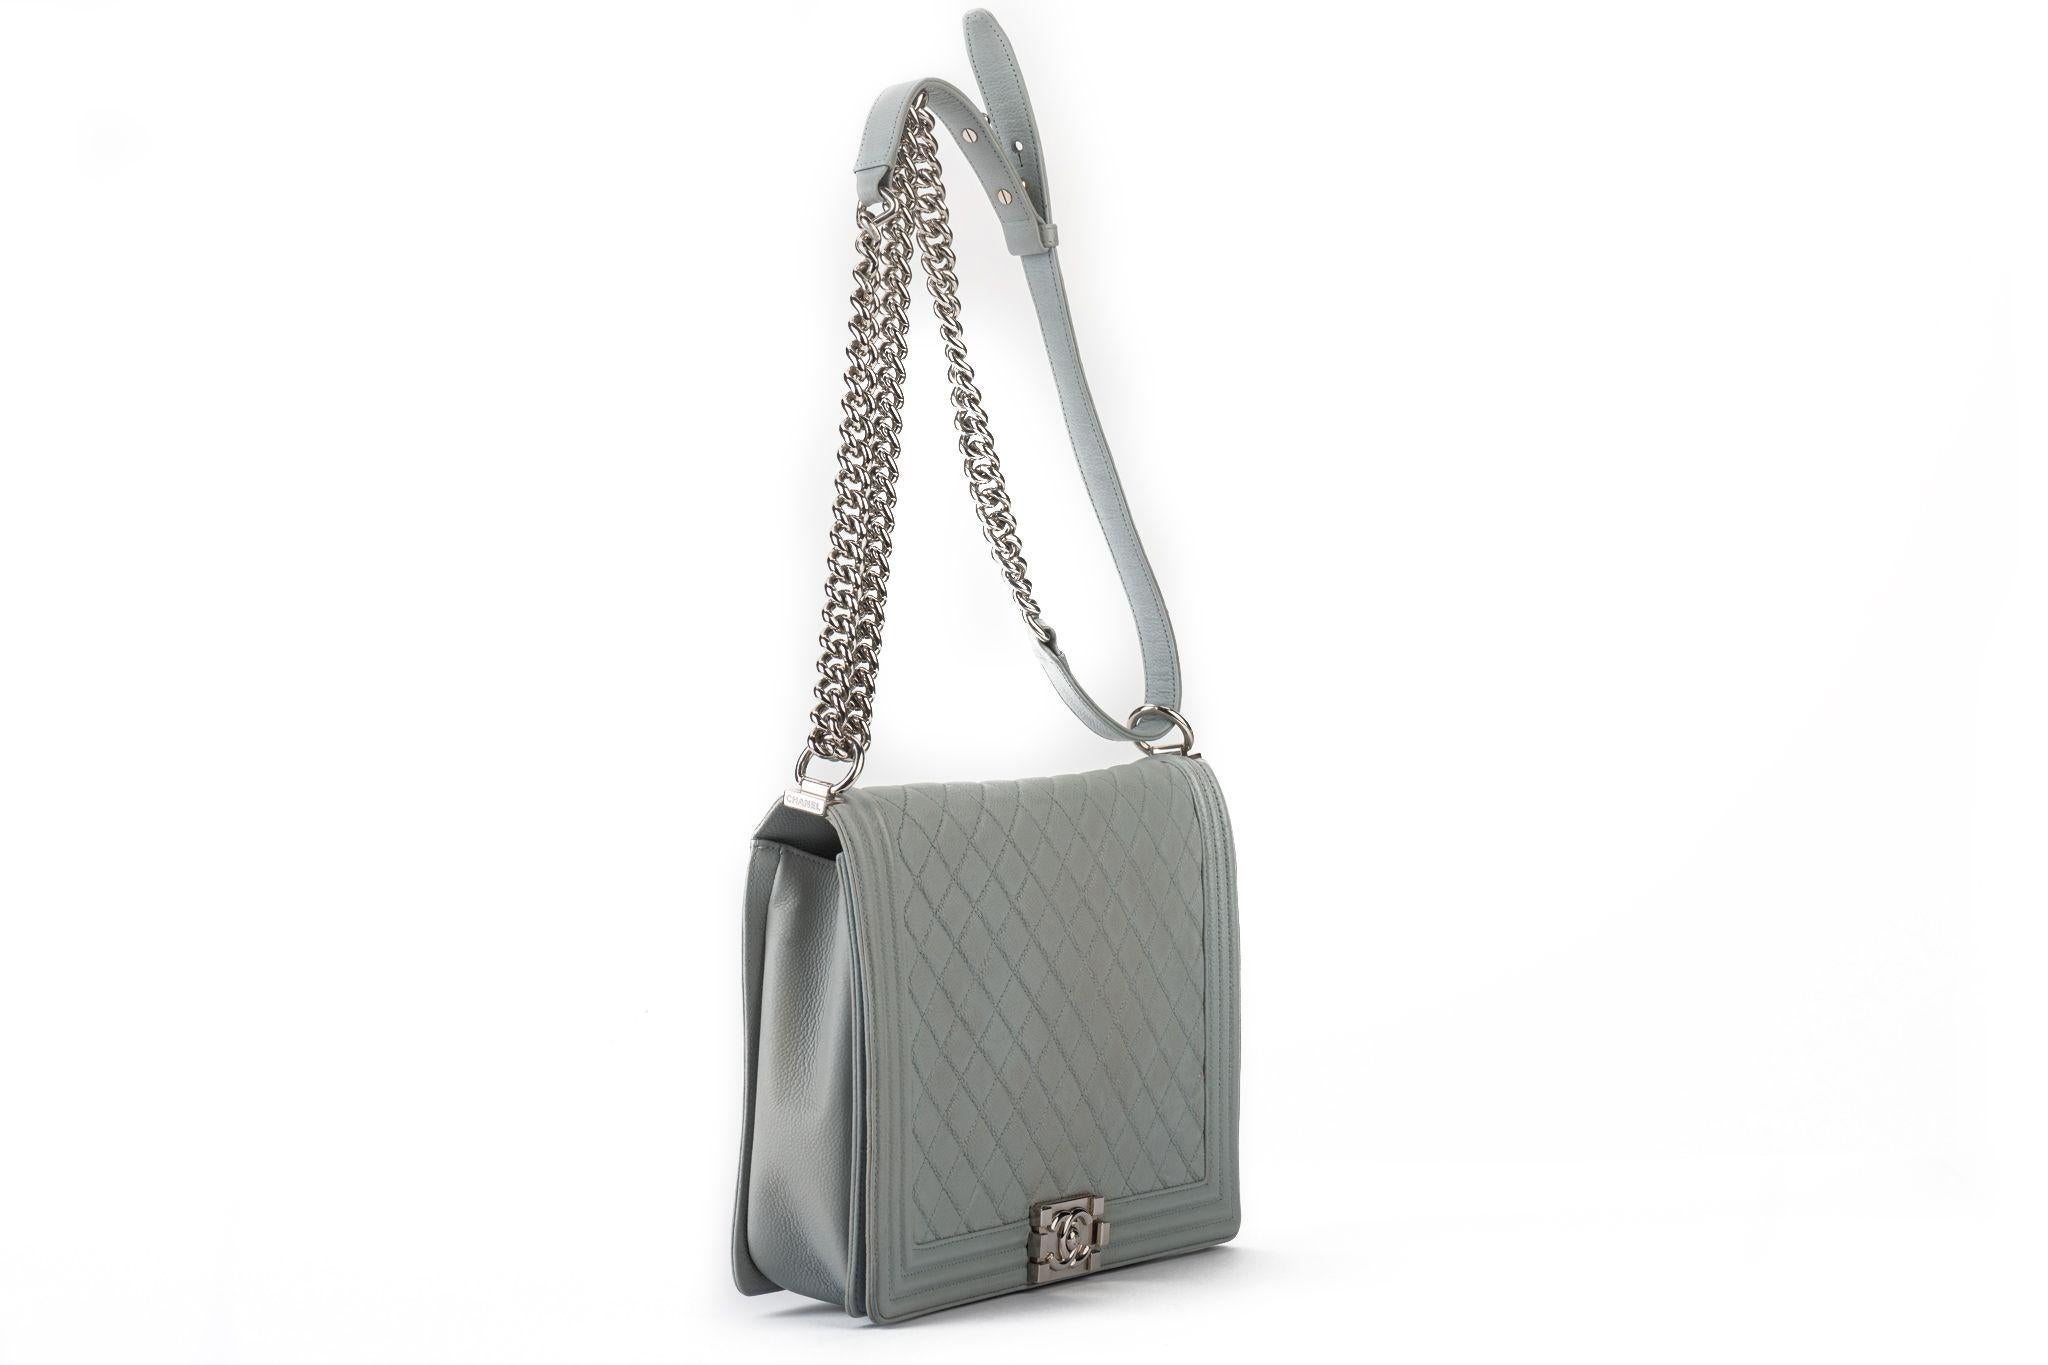 Chanel maxi grey caviar leather boy bag with silver tone hardware. Adjustable strap 20”. Collection 17. Comes with hologram and original dust cover.